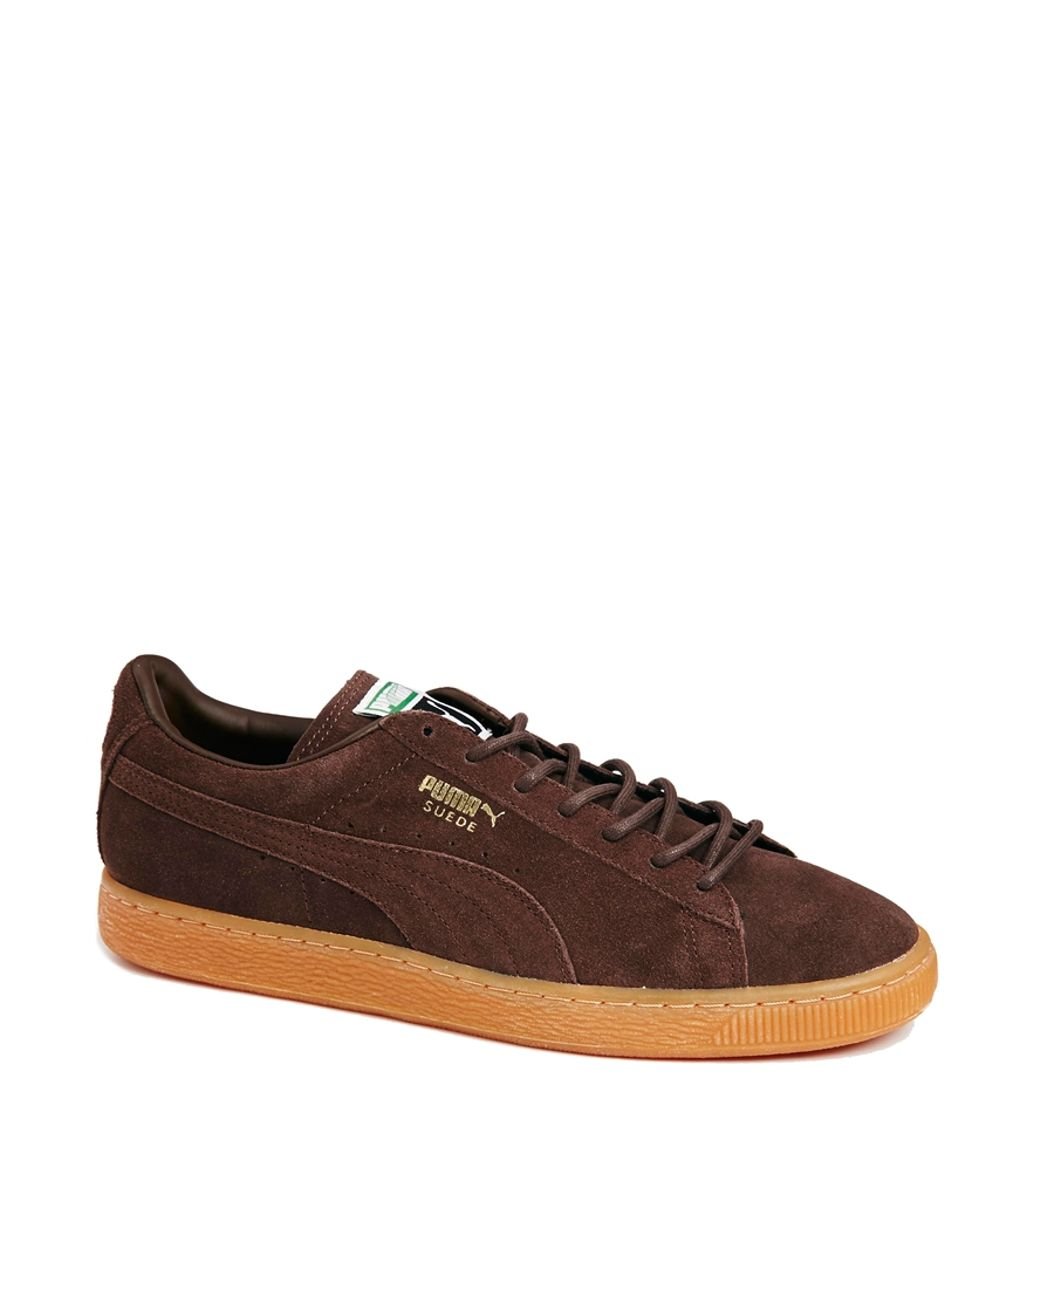 PUMA Trainers Classic in Brown for Men Lyst